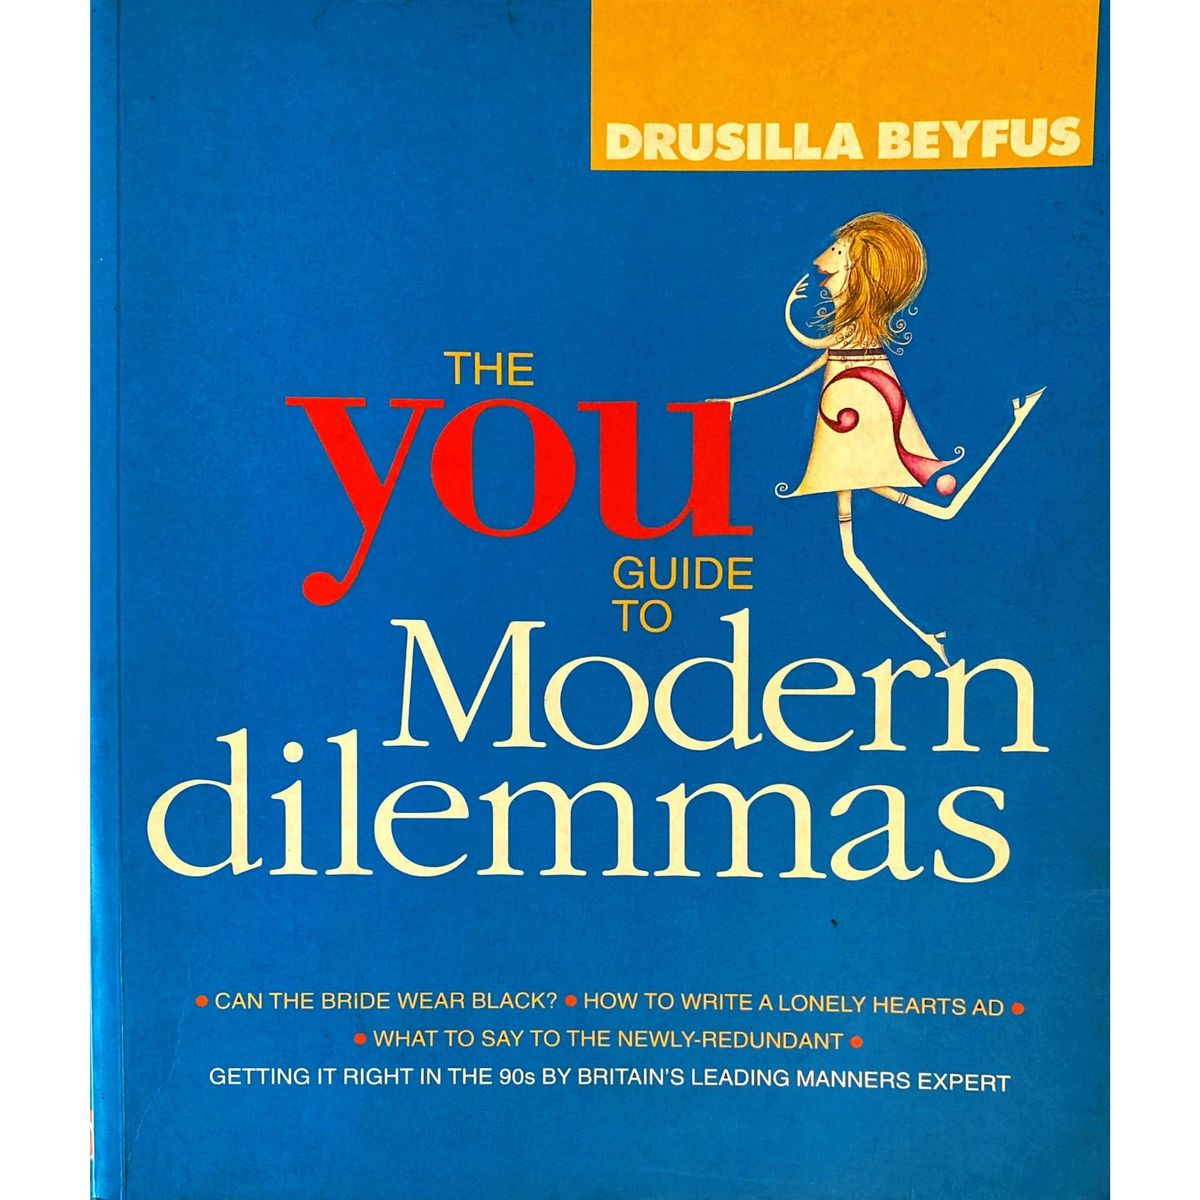 ISBN: 9781856262538 / 1856262537 - The You Guide to Modern Dilemmas by Drusilla Dreyfus [1996]